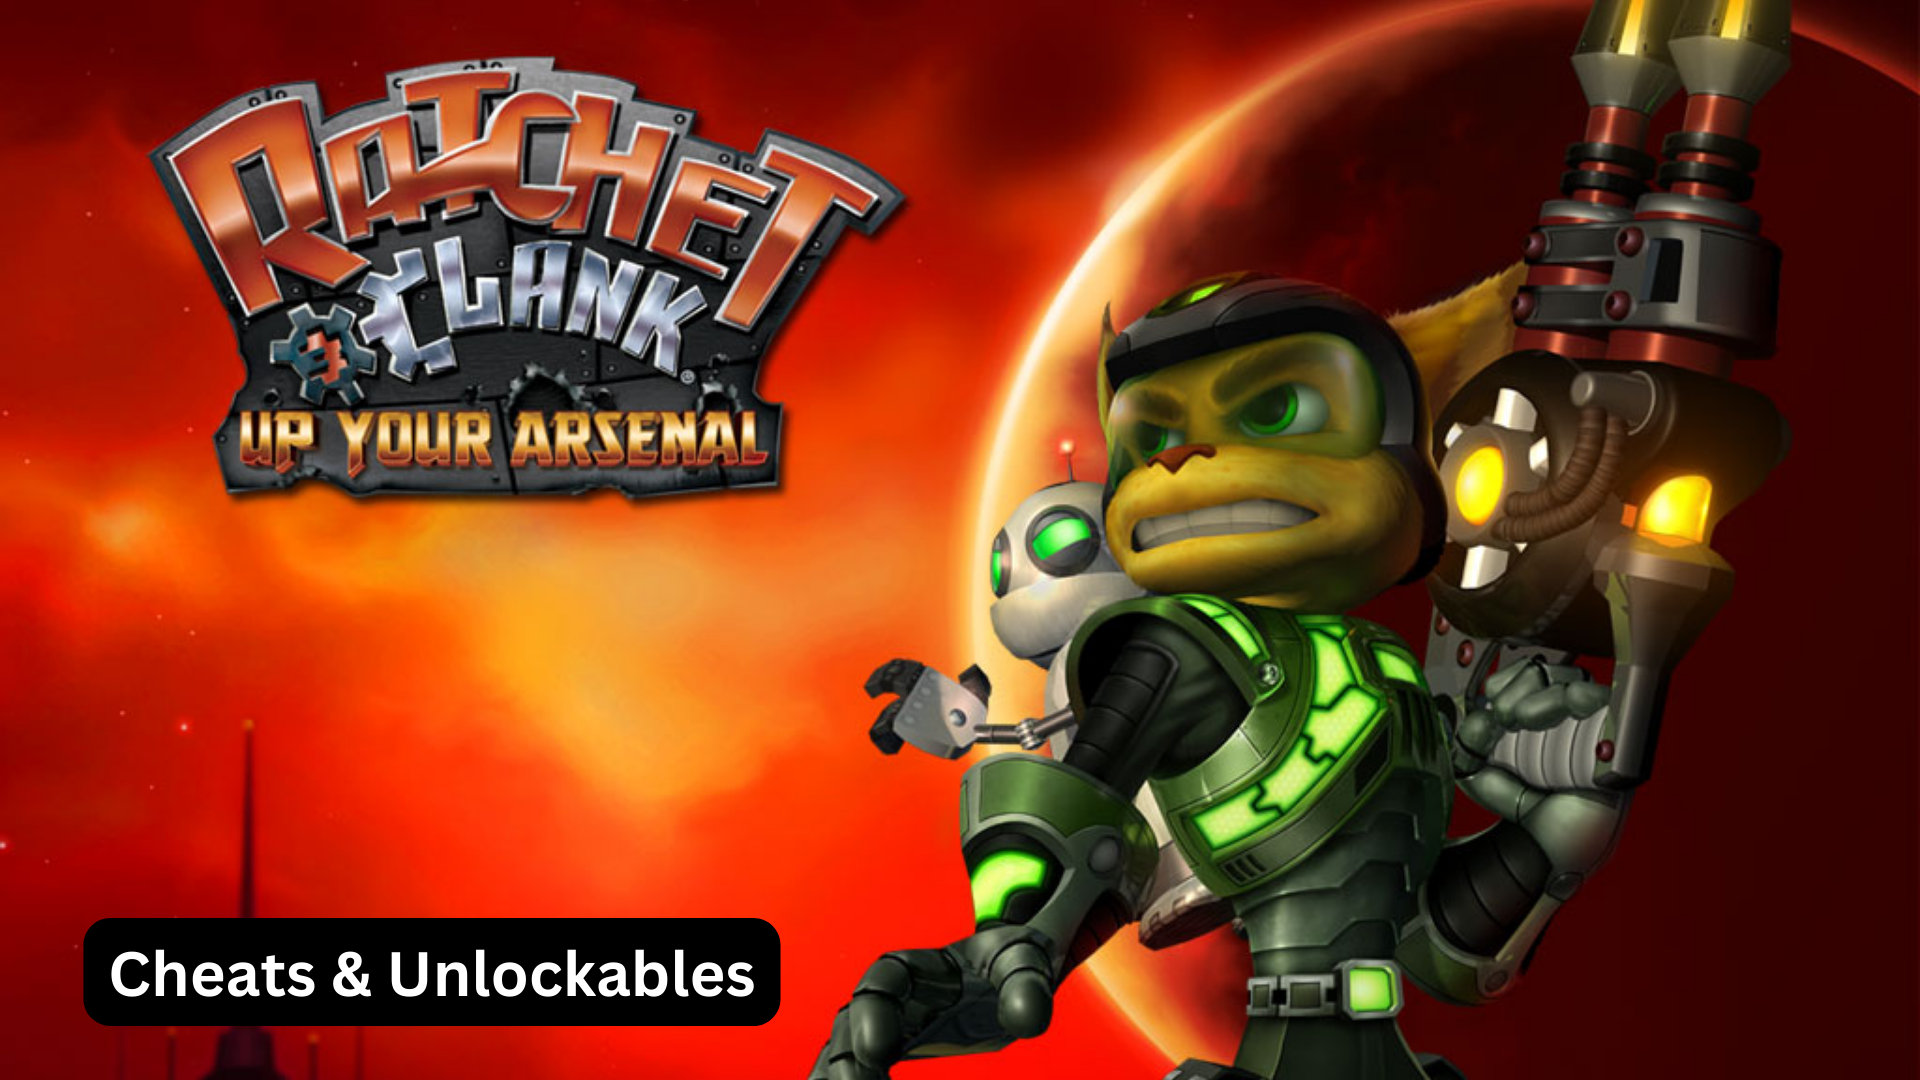 ratchet & clank: up your arsenal